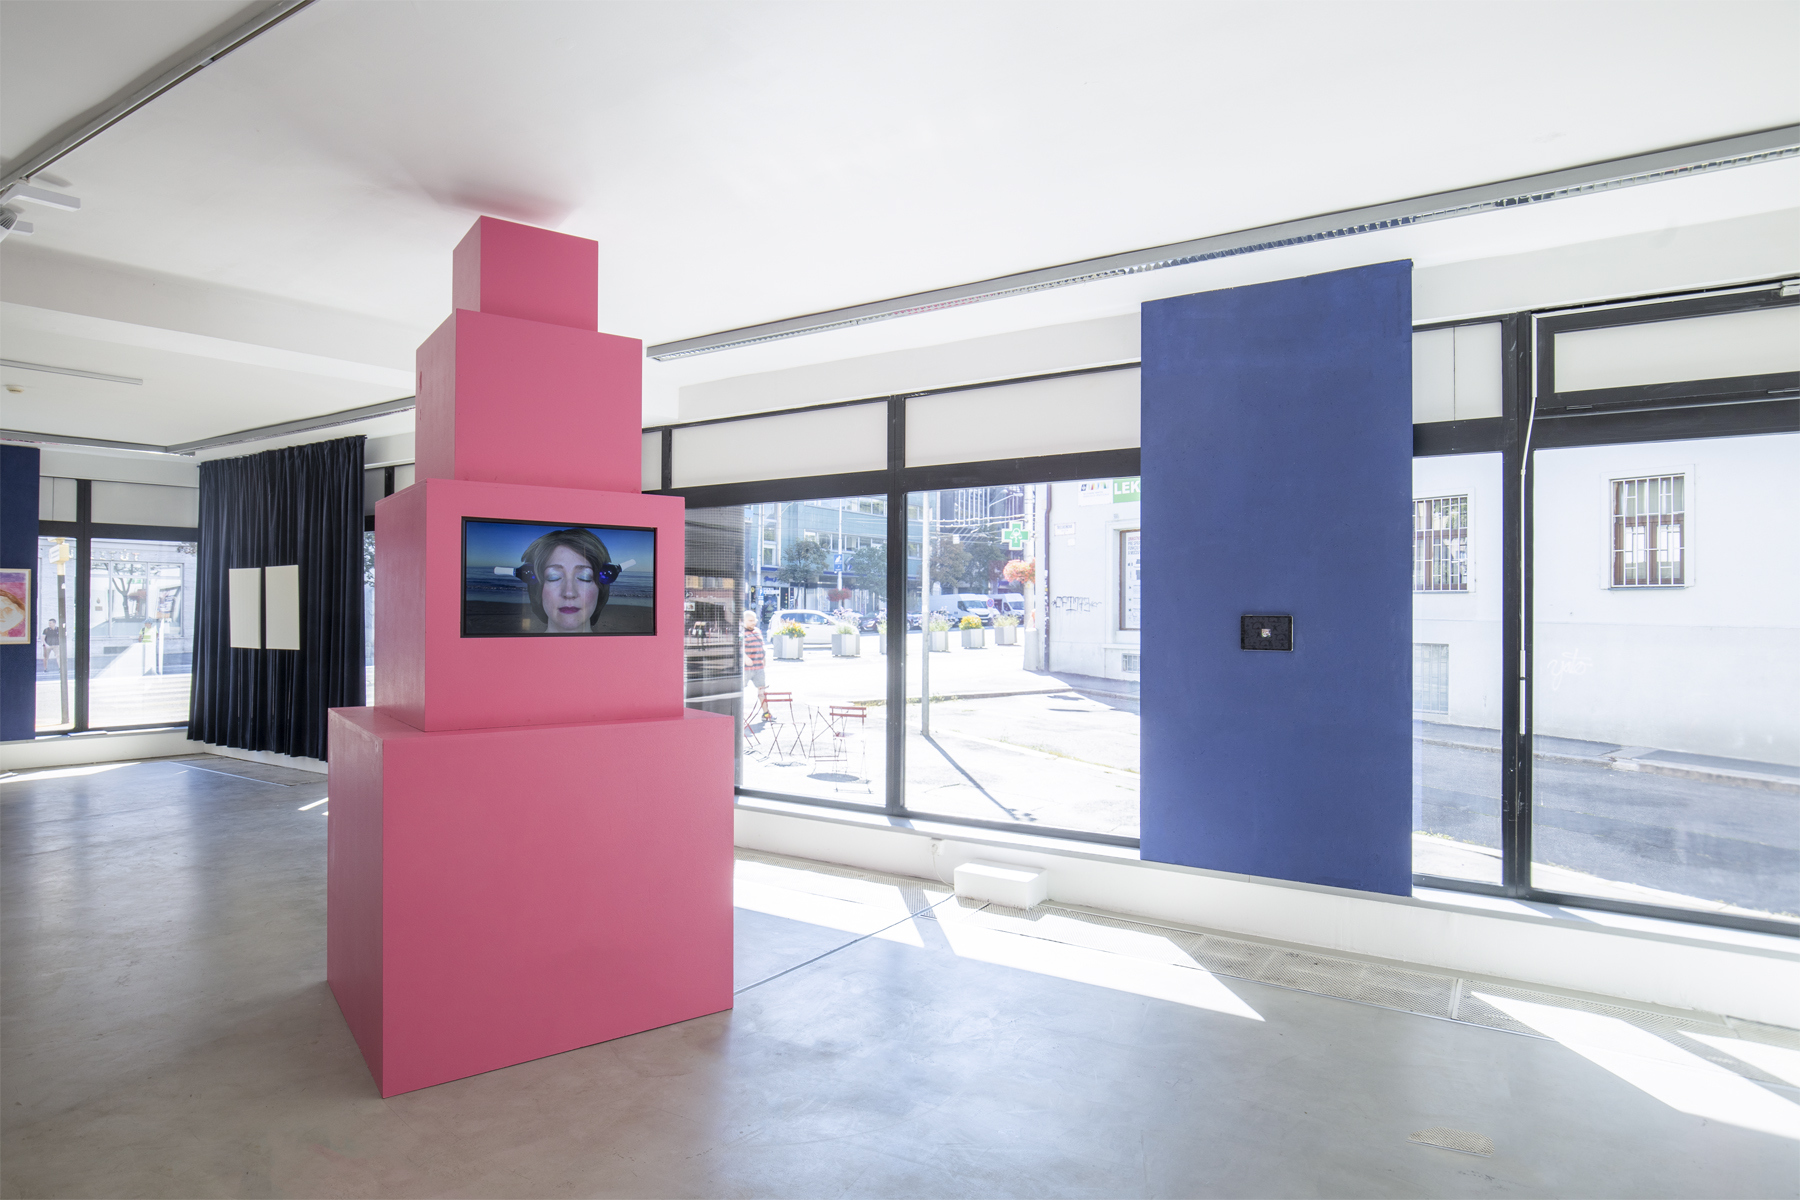 Installation view featuring works from Christoph Bruckner, Shana Moulton & Jakob Jakobsen (left to right)